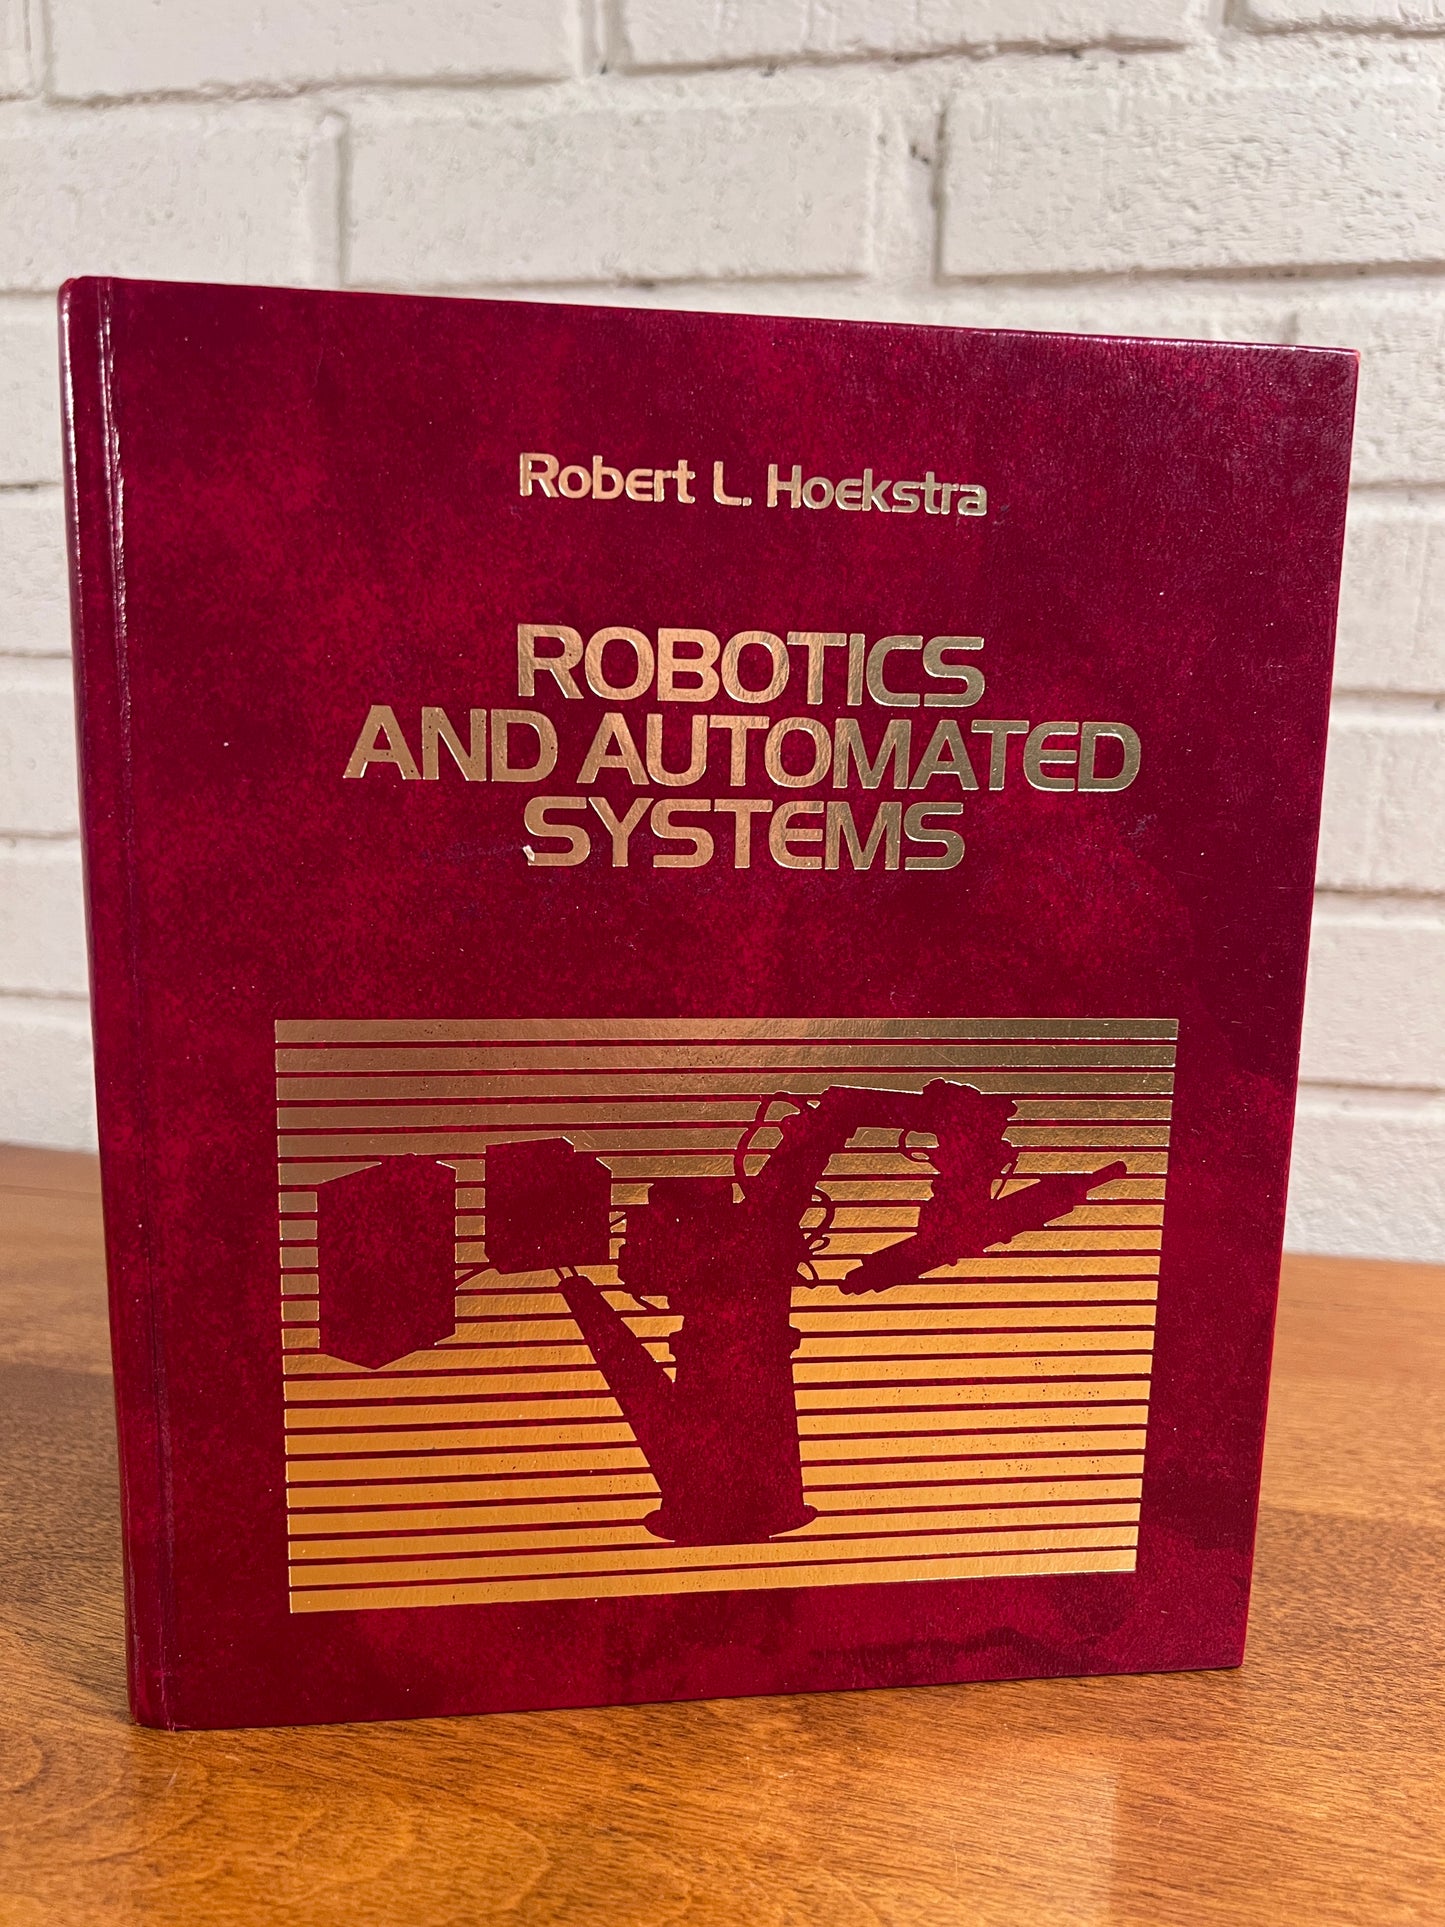 Robotics And Automated Systems by Robert Hoekstra